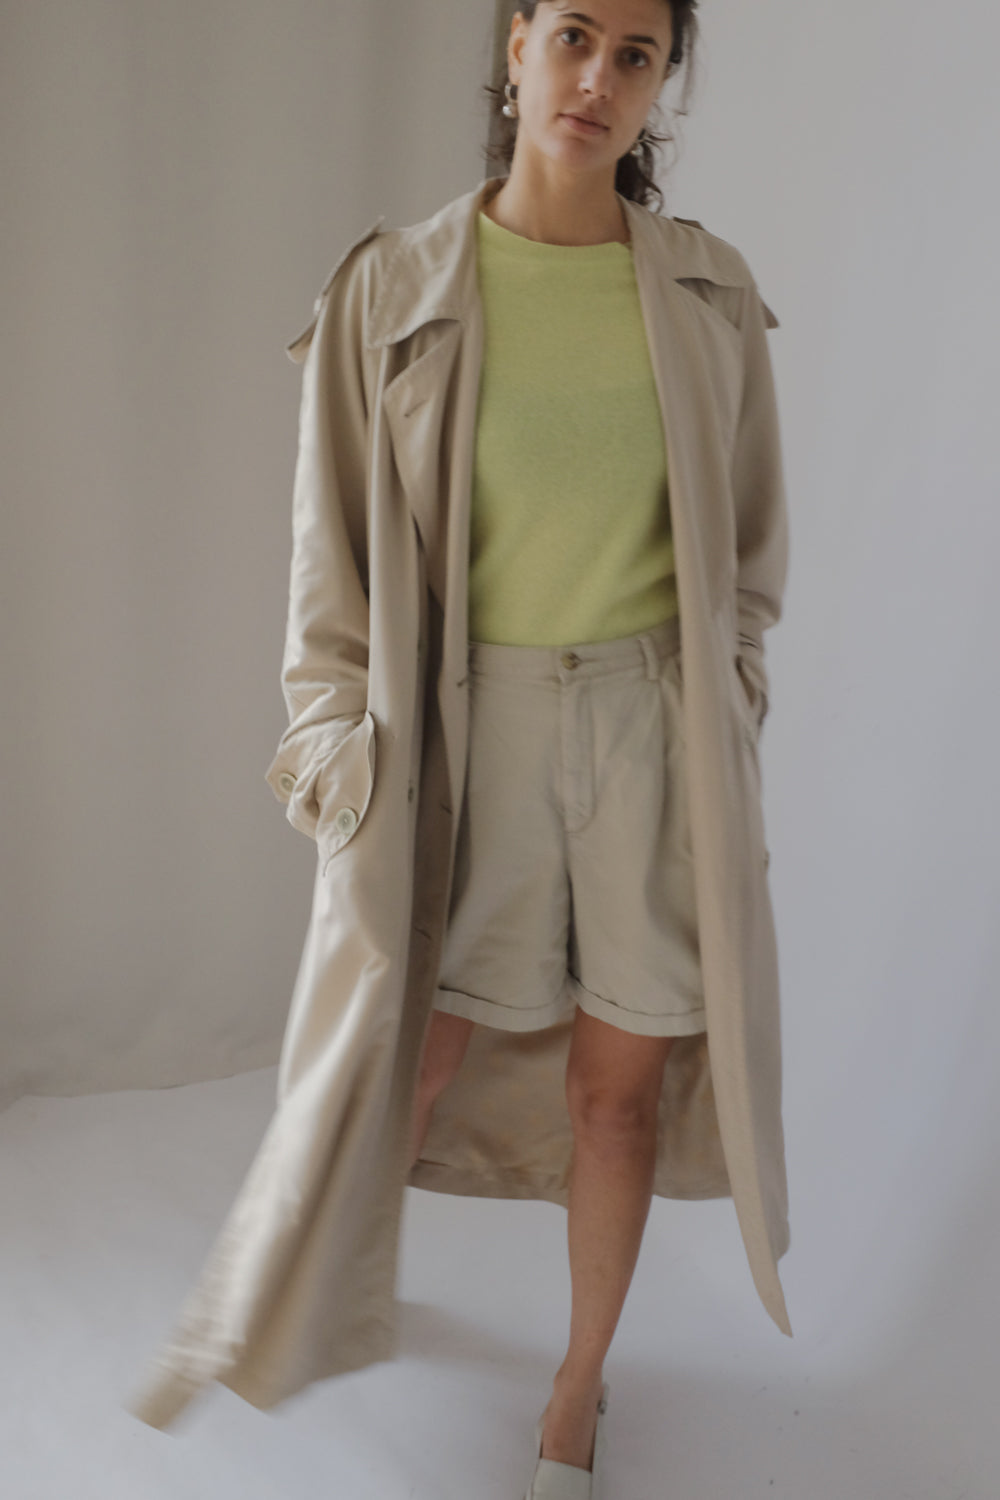 CLASSY BEIGE MAXI VINTAGE SUMMER TRENCH